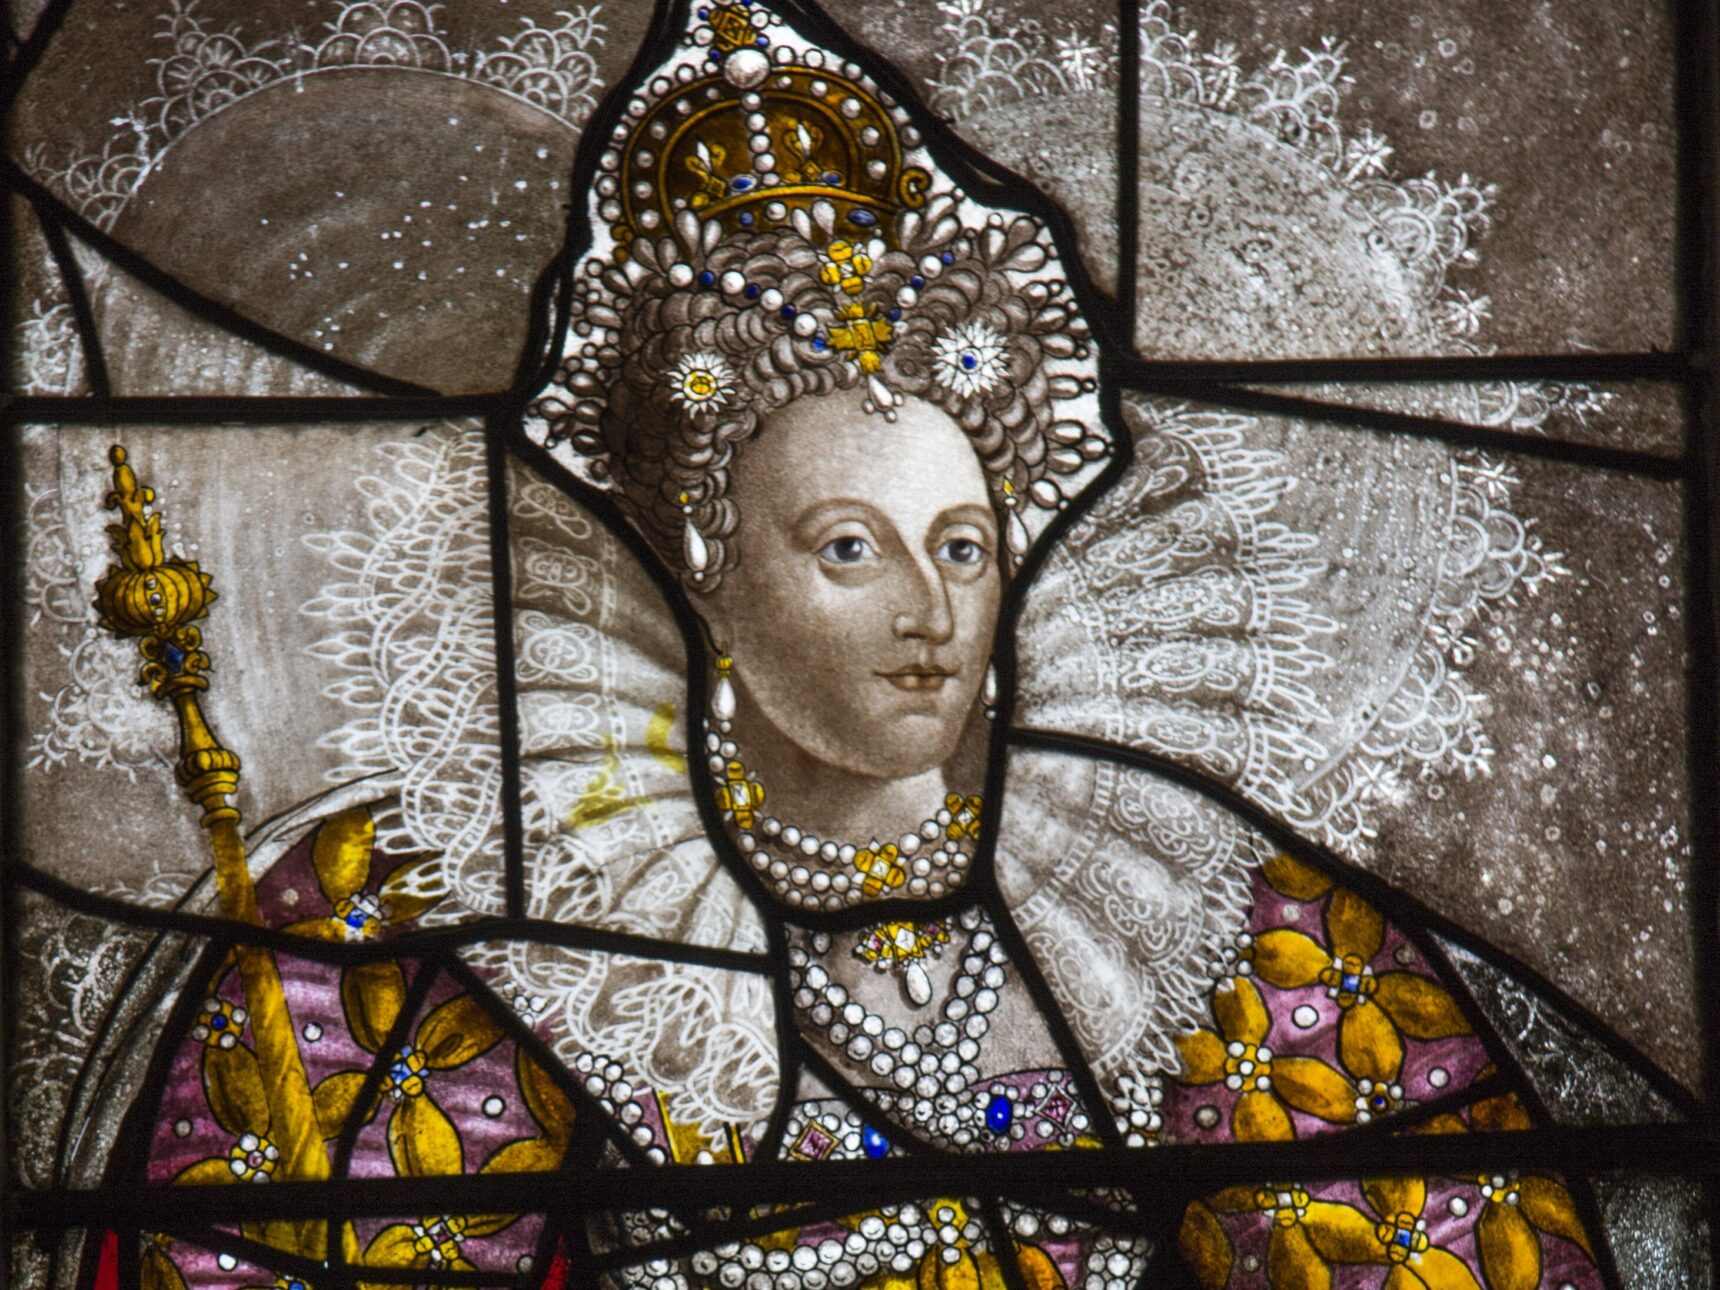 Sudeley was visited on three occasions by Queen Elizabeth I, who held a three-day party there to celebrate the defeat of the Spanish Armada